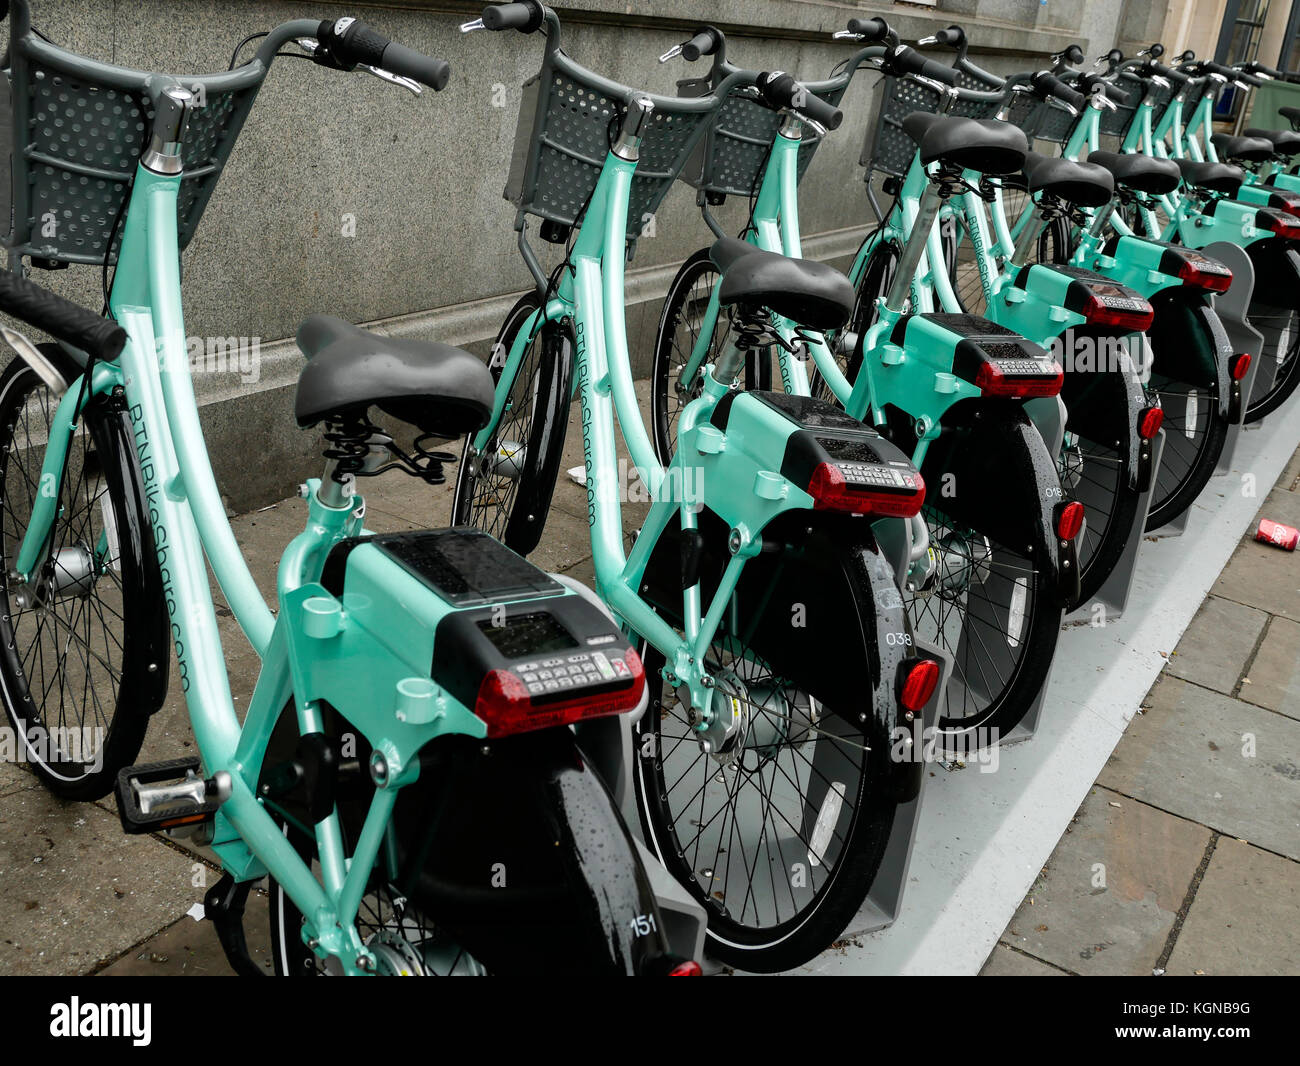 Rows of electric bikes for hire Brighton England Stock Photo